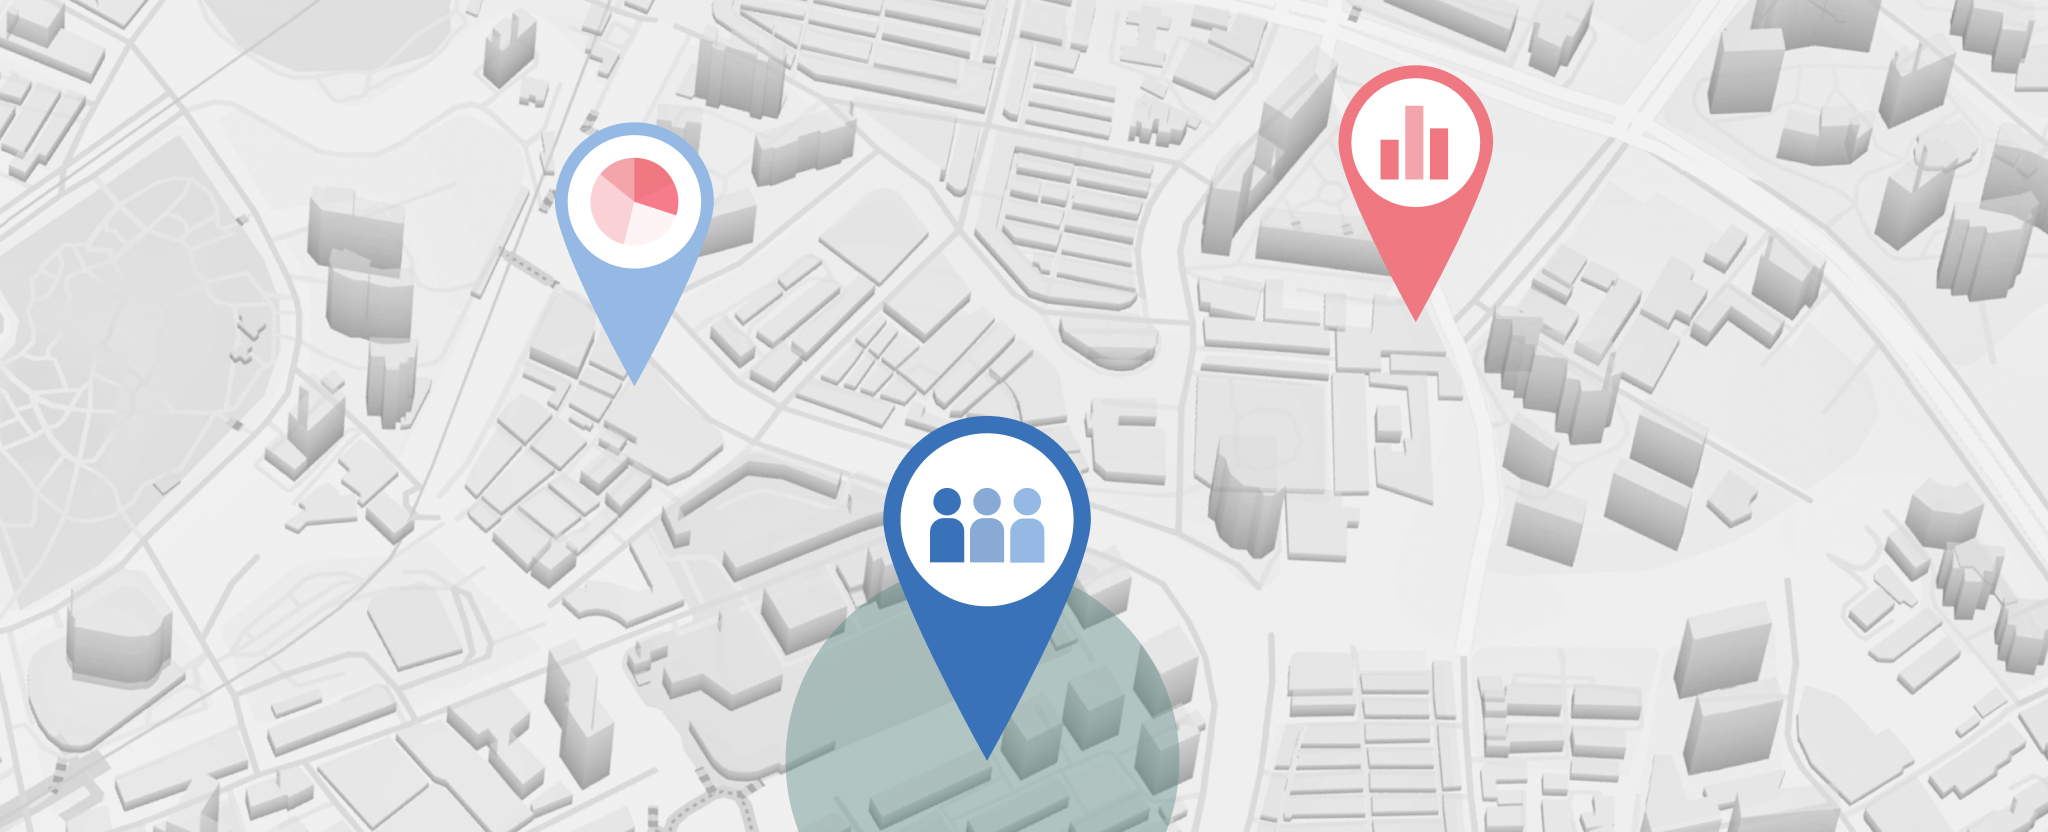 Data points are pinned to a map to reveal insights and opportunities for marketing.